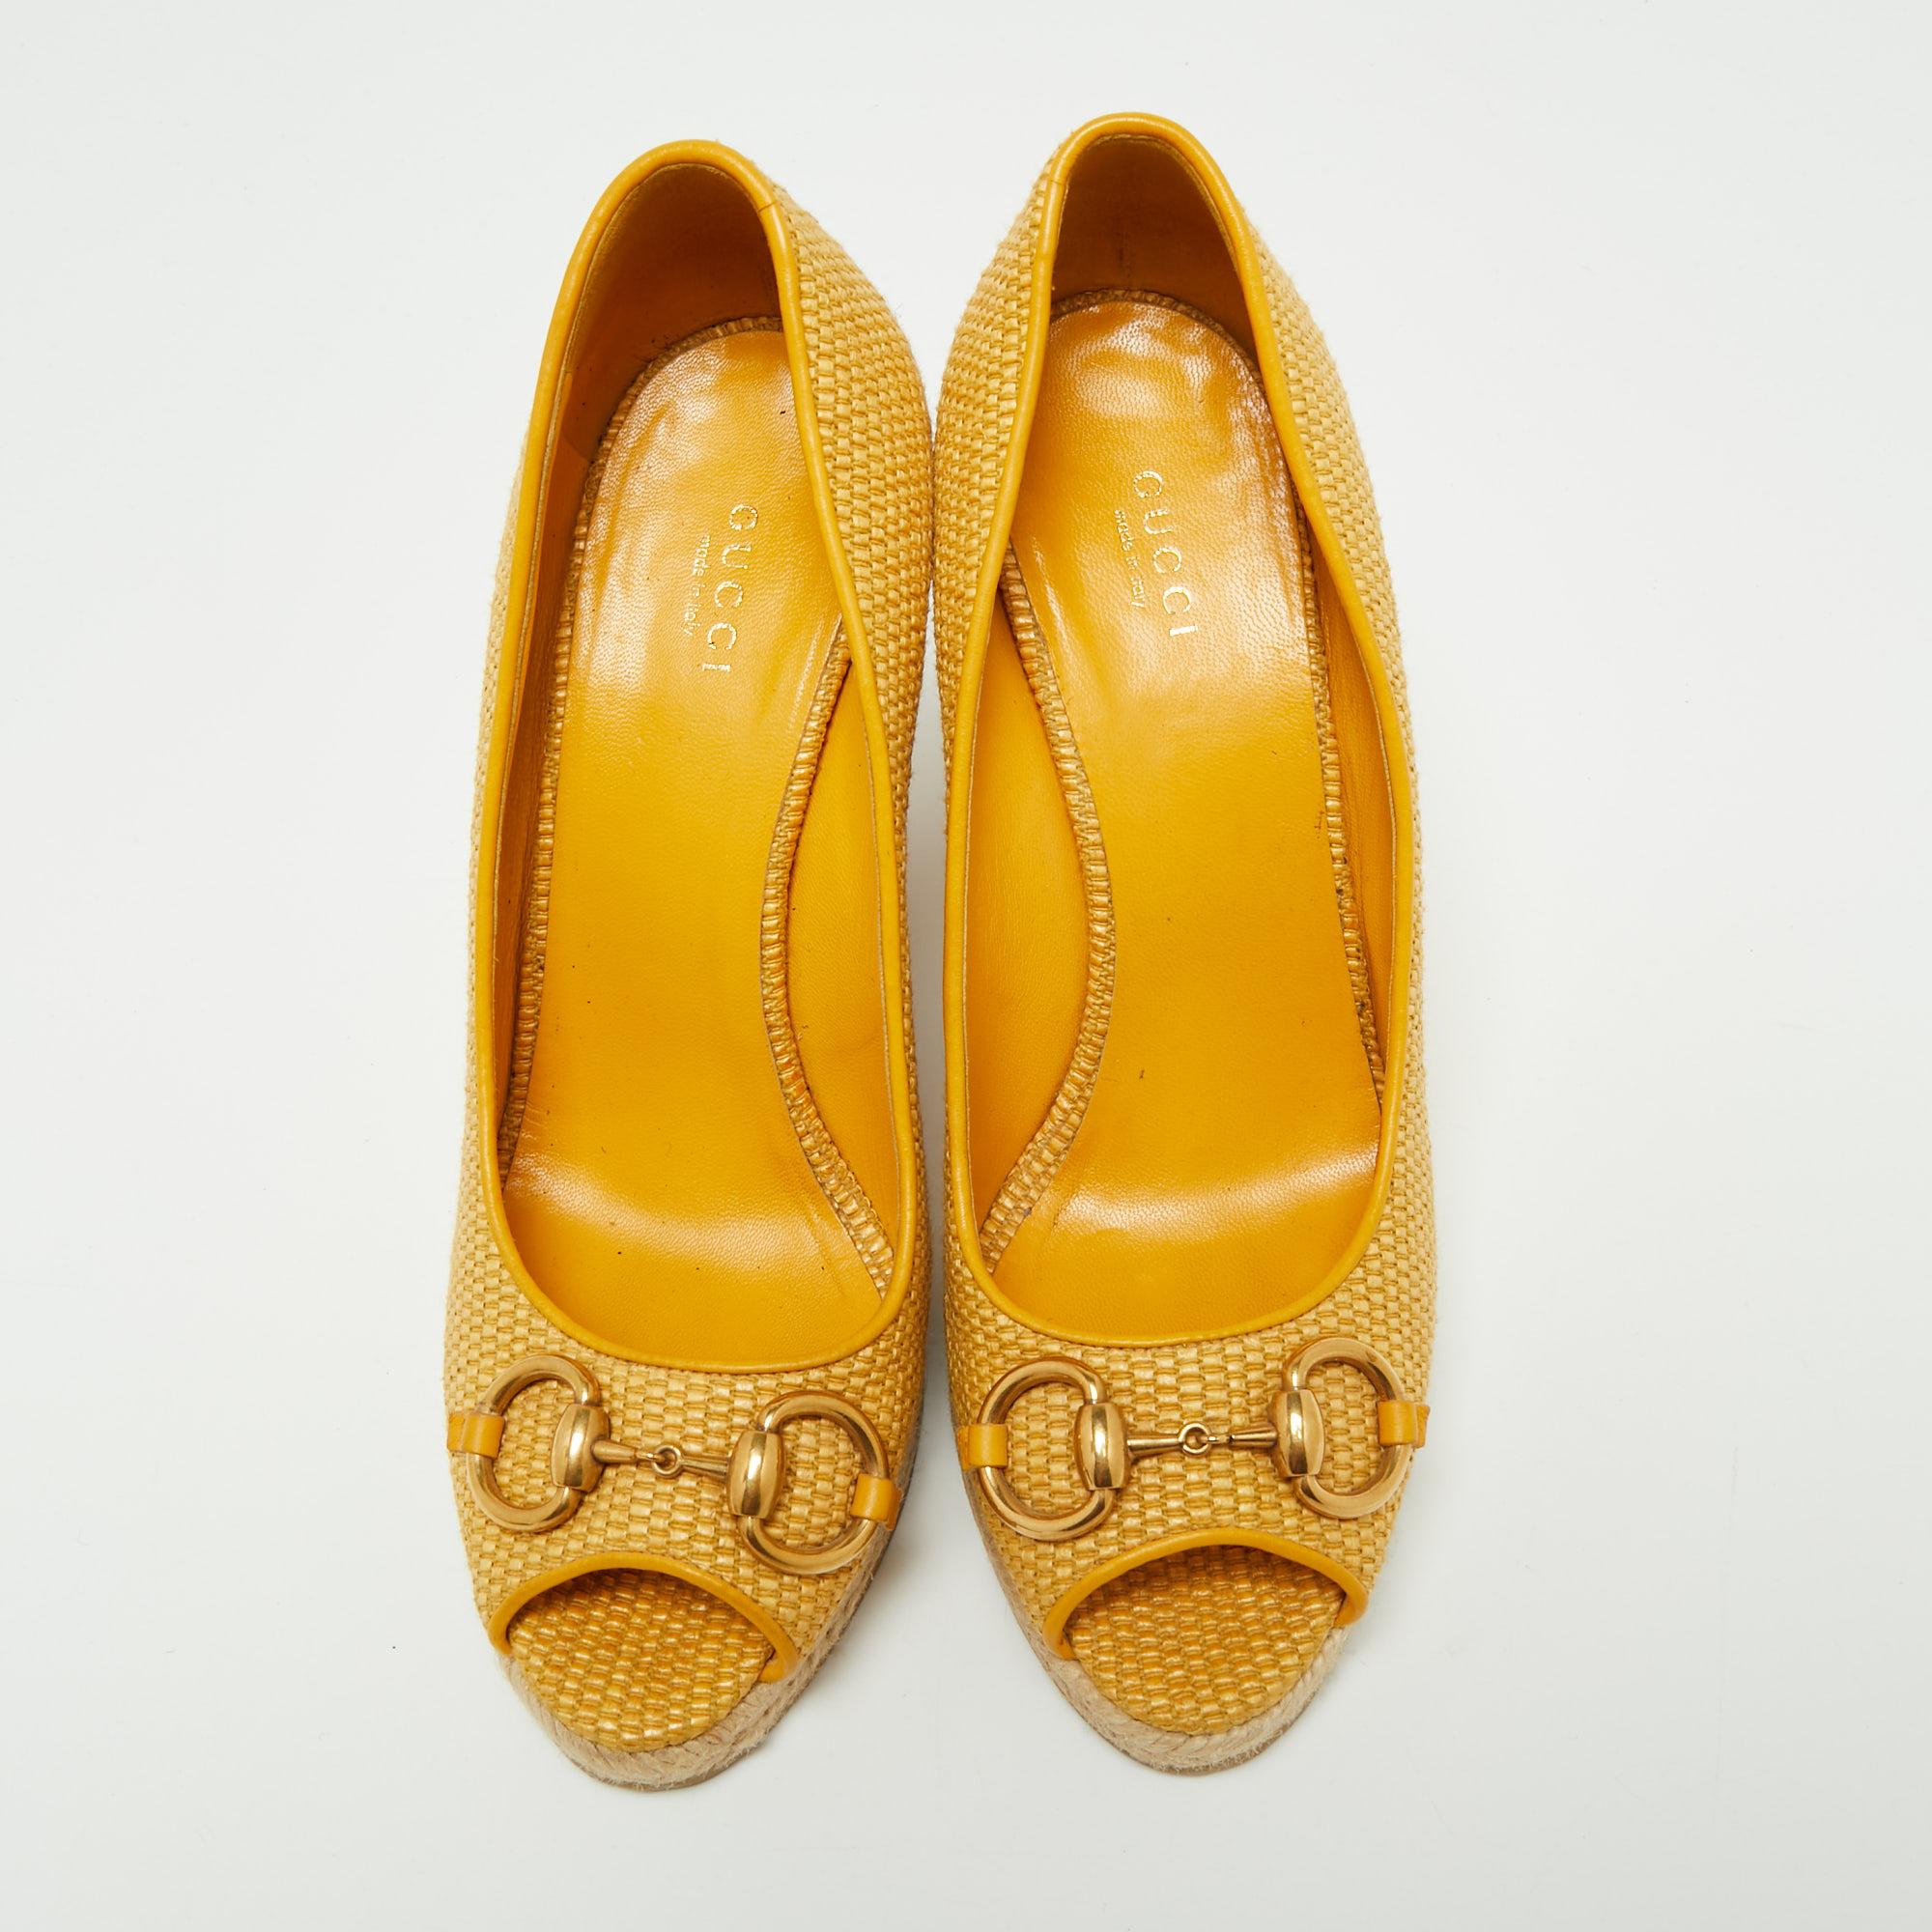 Walk stylishly in these Charlotte pumps from the House of Gucci. Designed using mustard raffia, these sandals display a Horsebit accent on the toes, wedge heels, and peep toes. They are finished with gold-toned hardware for a classy effect. Match